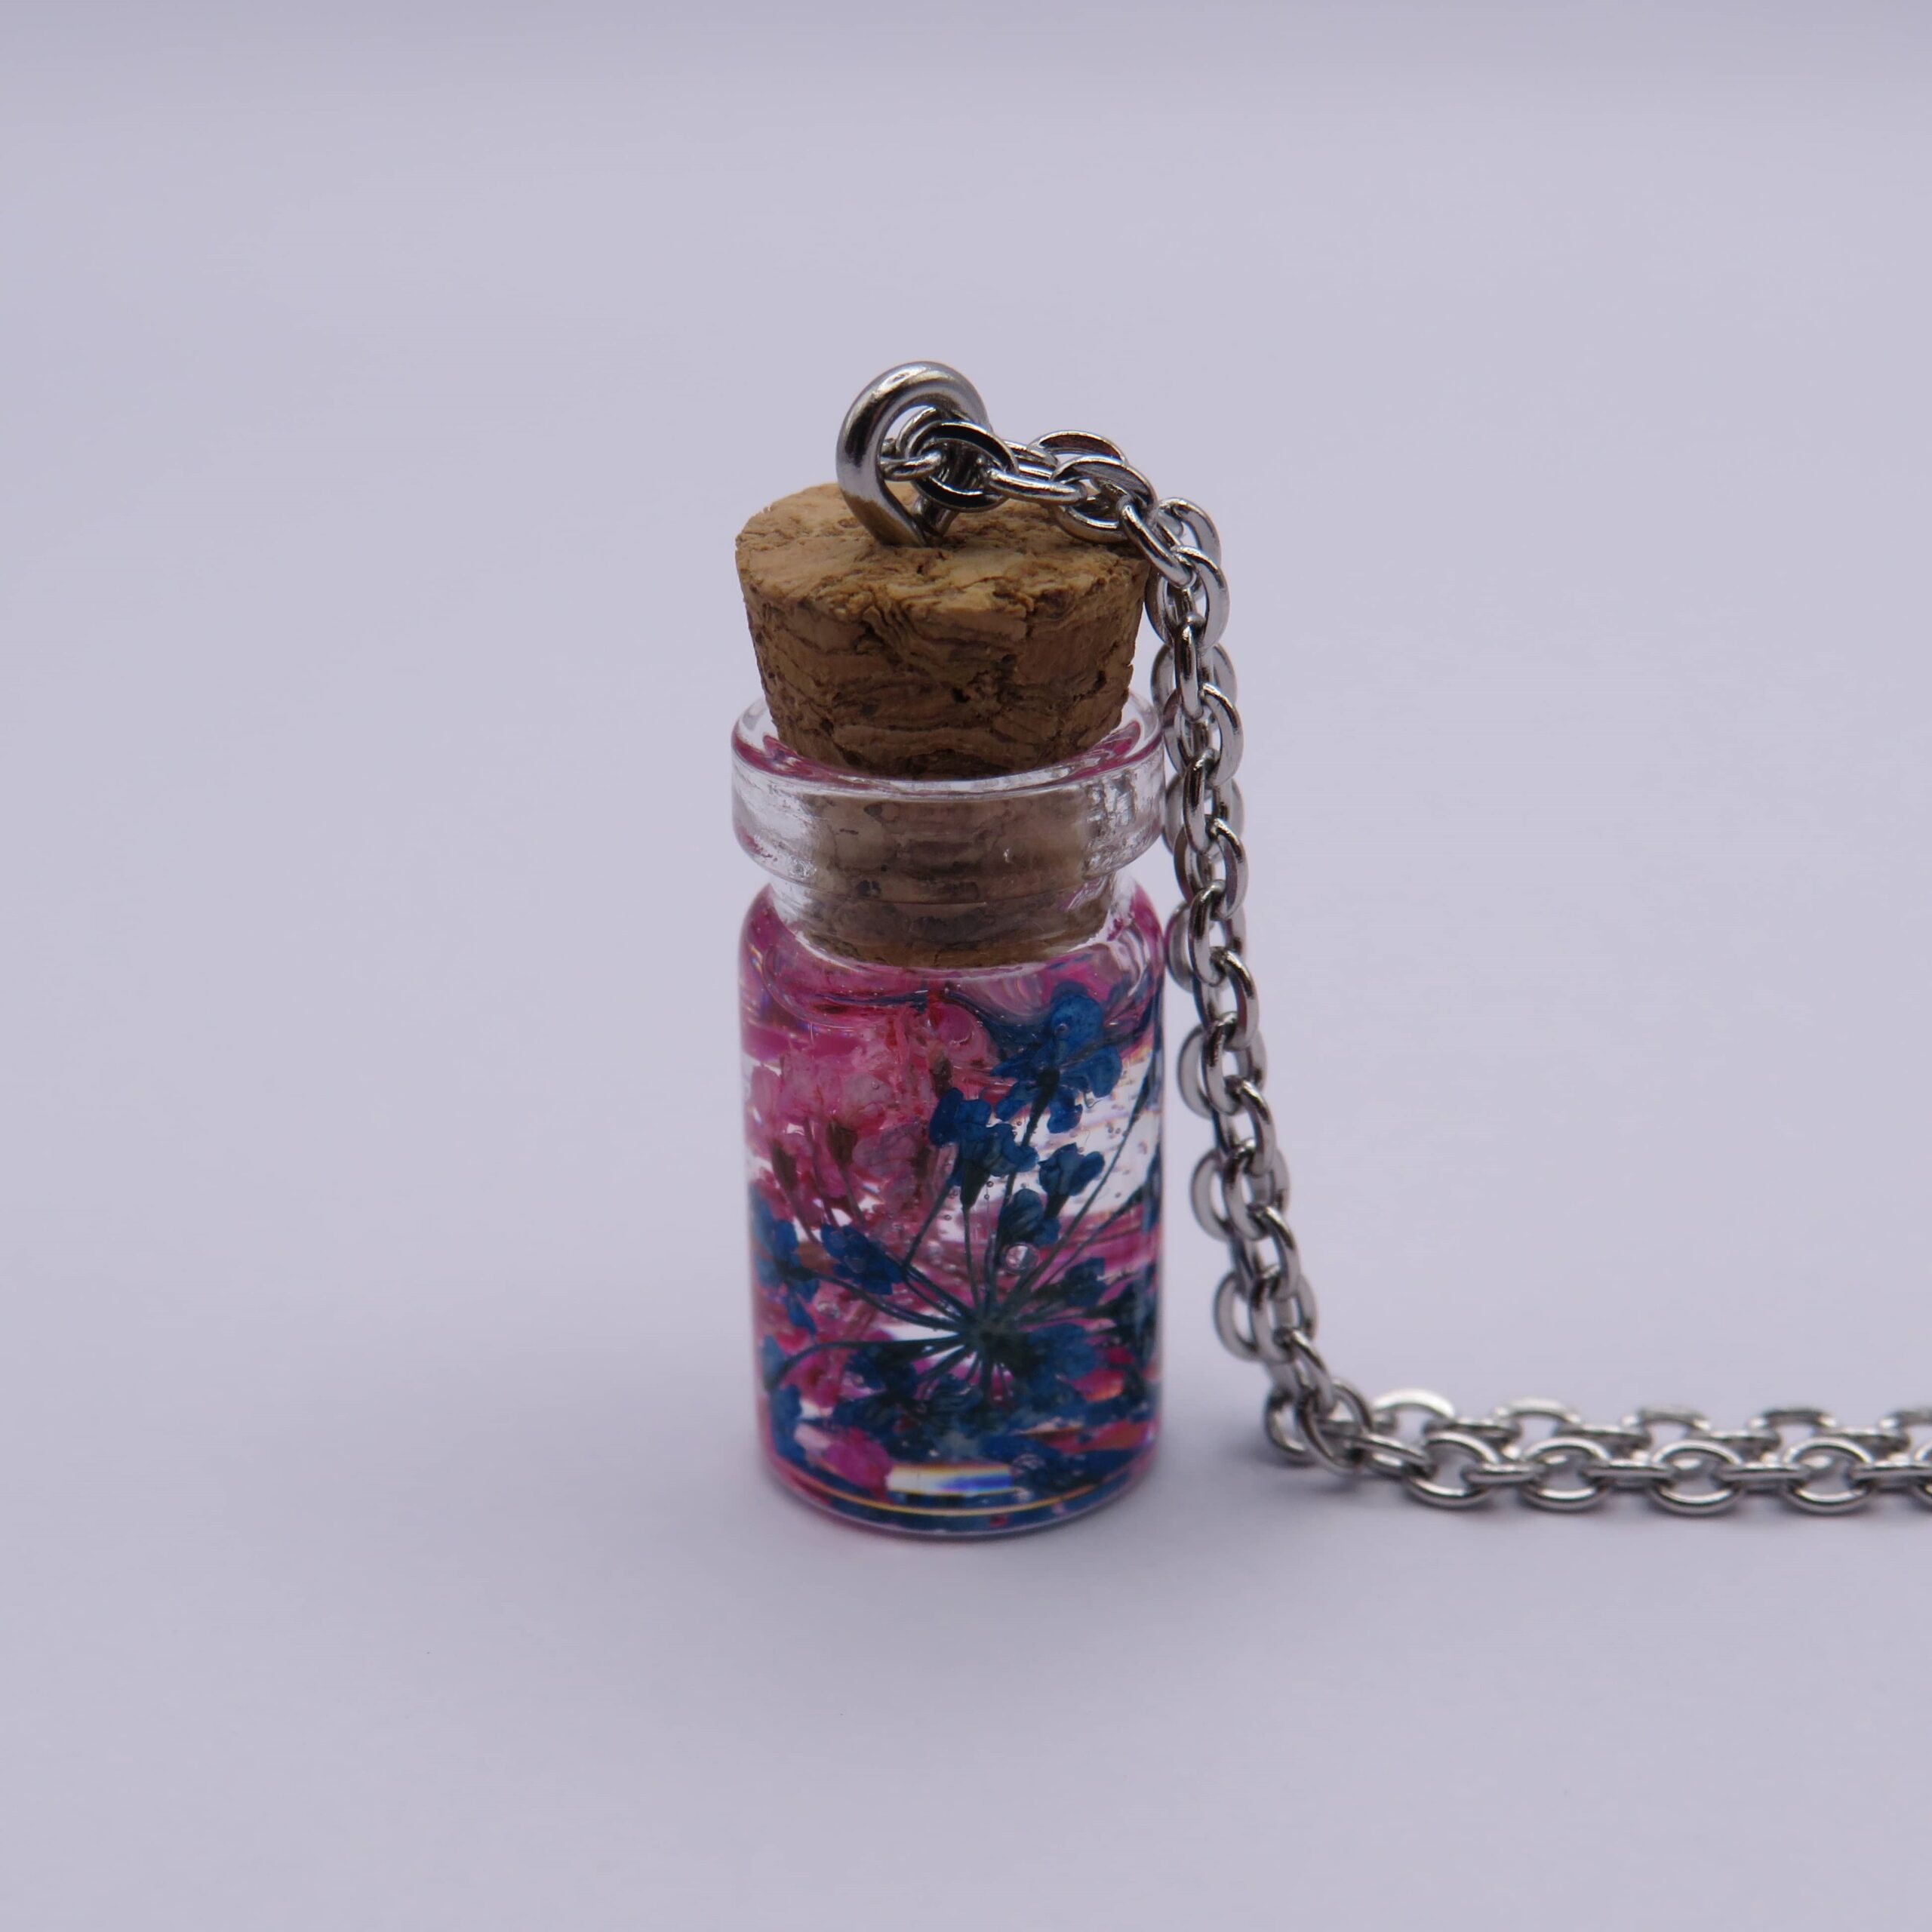 Stainless Steel Pink & Blue Flowers Mini Glass Bottle Pendant Necklace